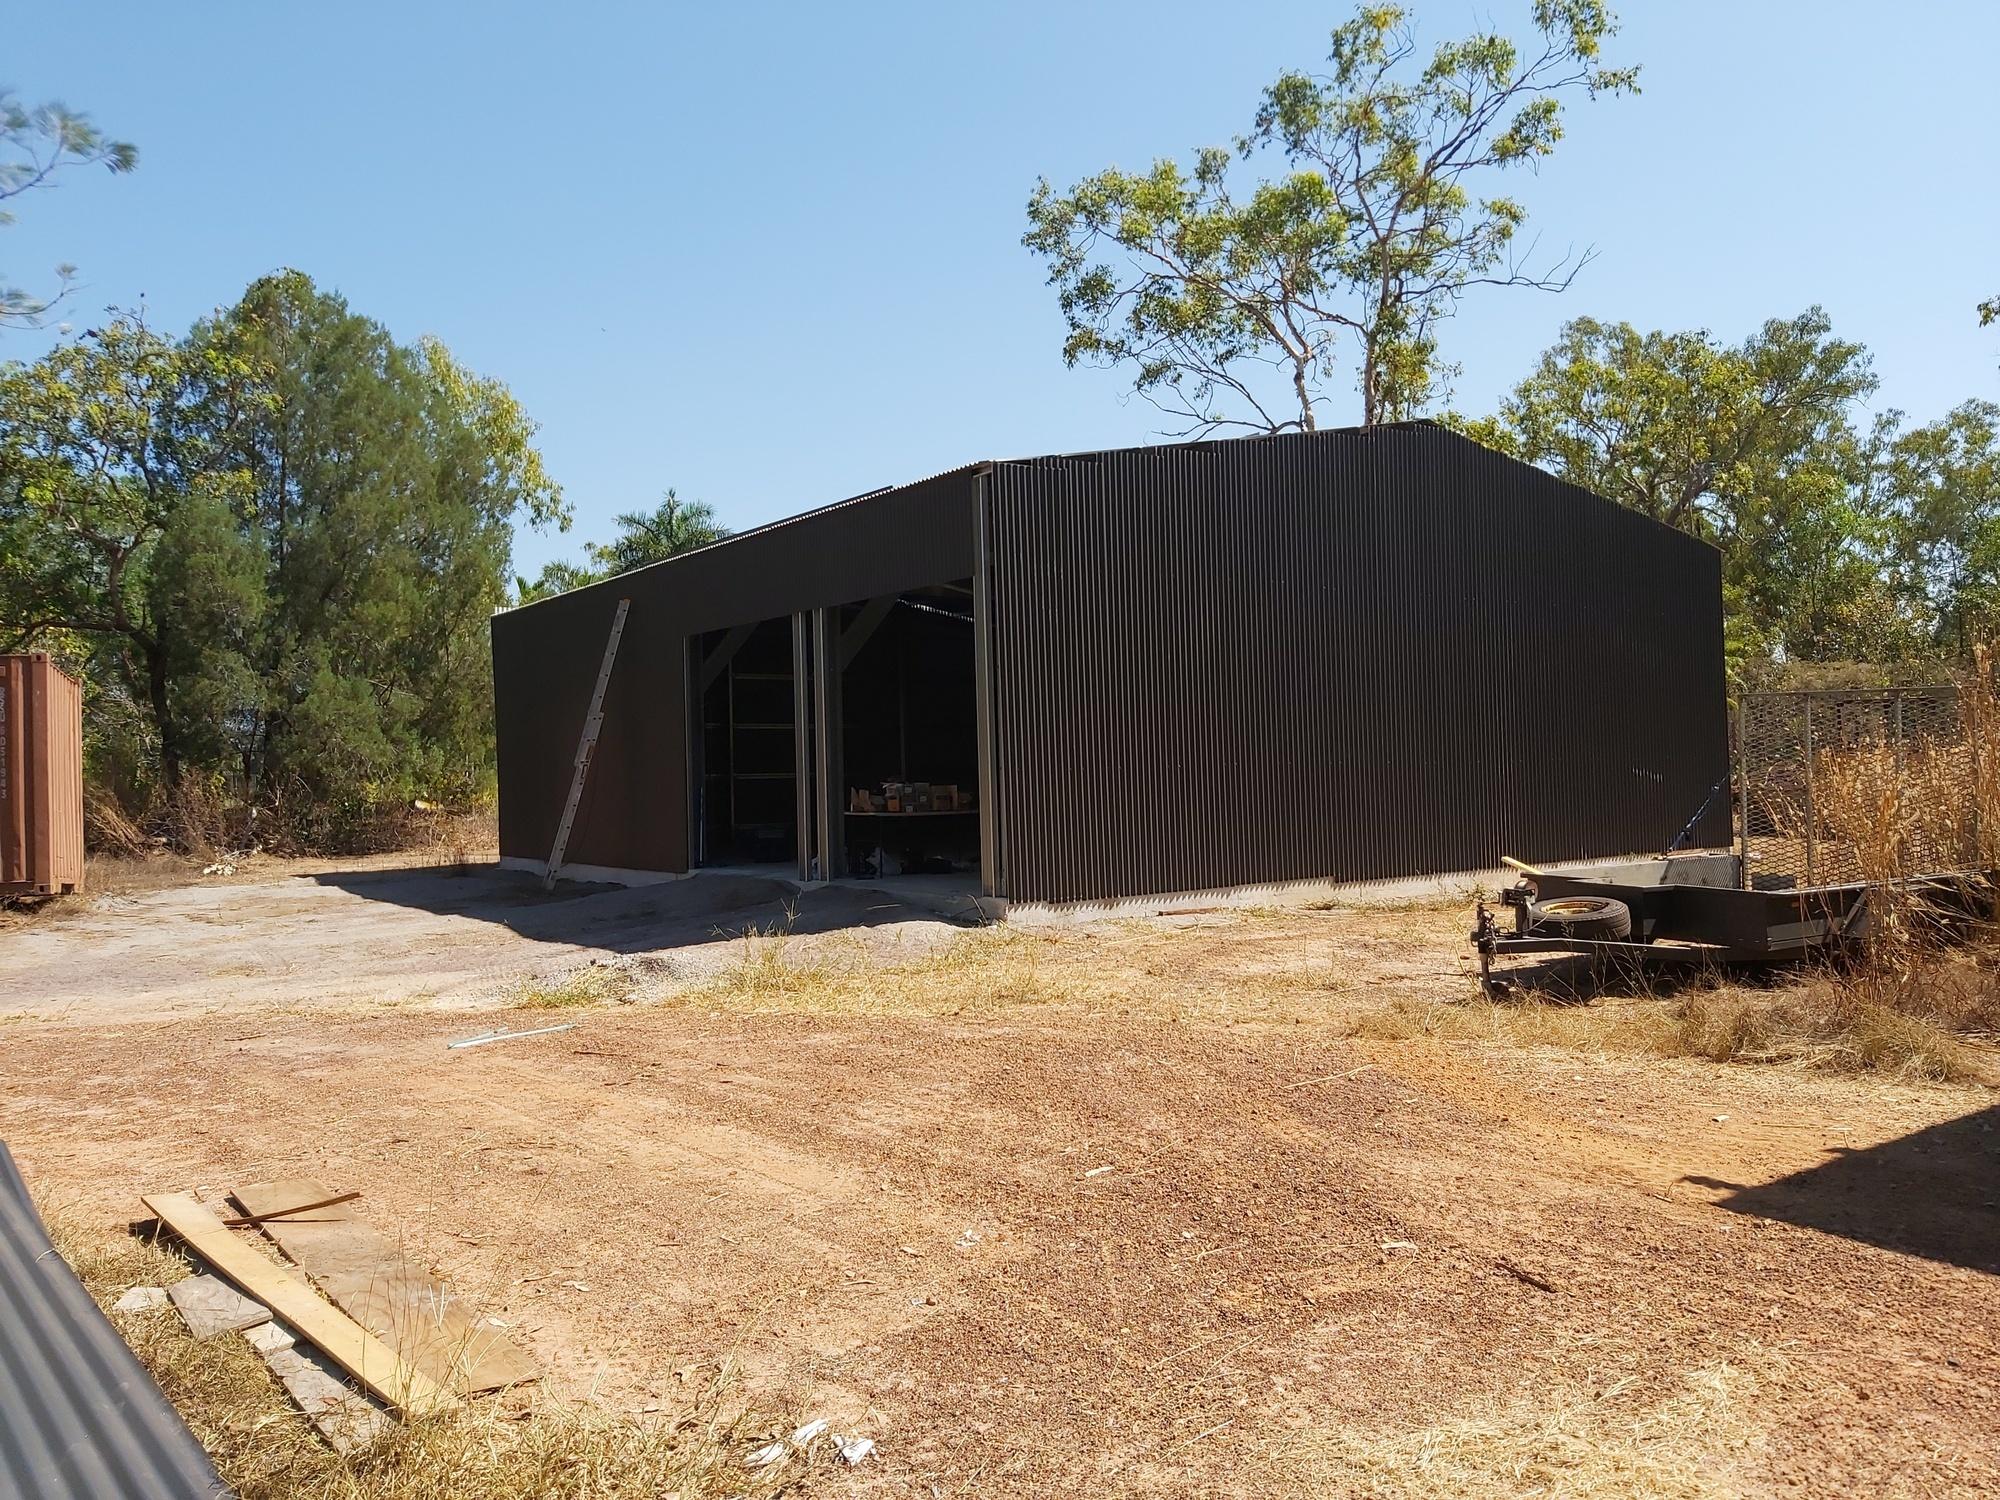 Kim from Humpty Doo, NT loves COLORBOND® steel. Roofing, Walling, Sheds made from COLORBOND® steel in colour Ironstone®